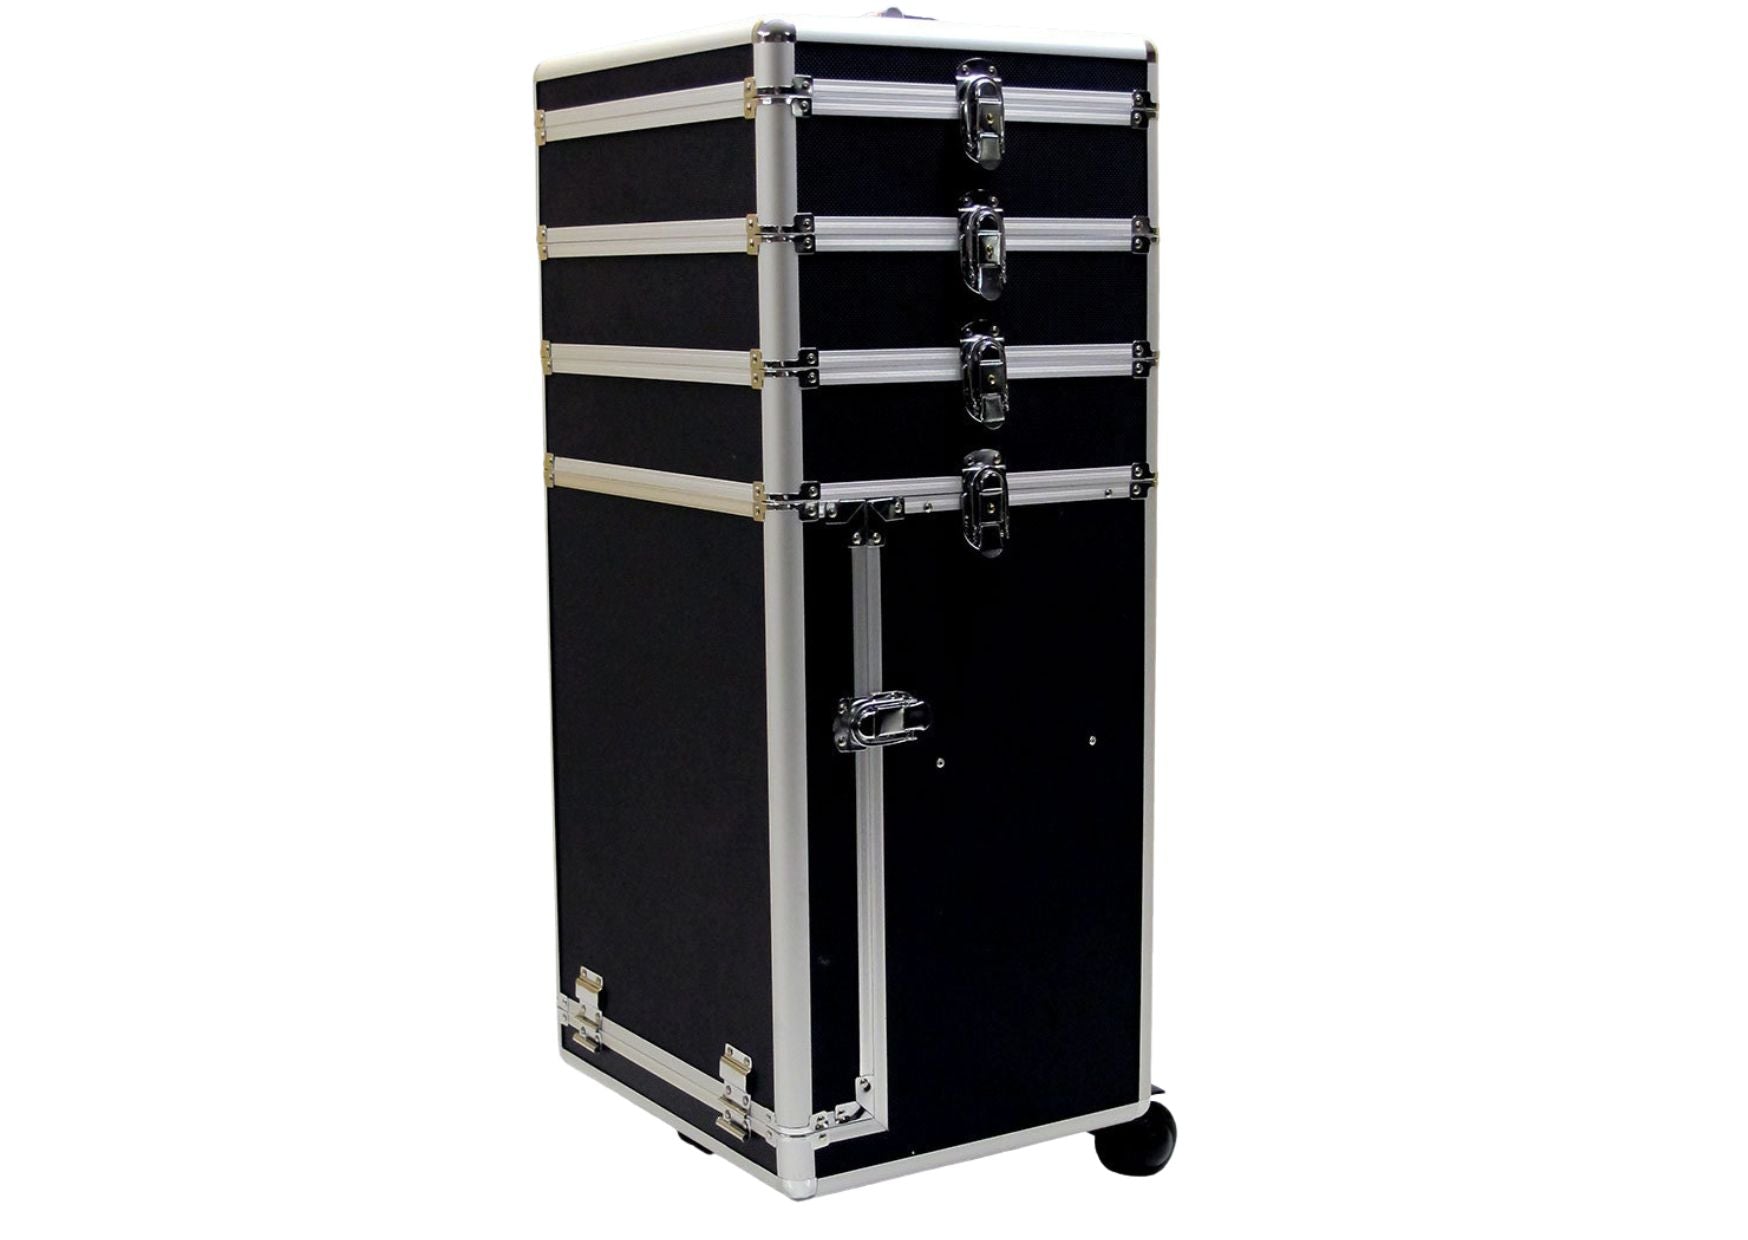 Suitcase trolley in black, dimensions 340 x 370 x 740 mm